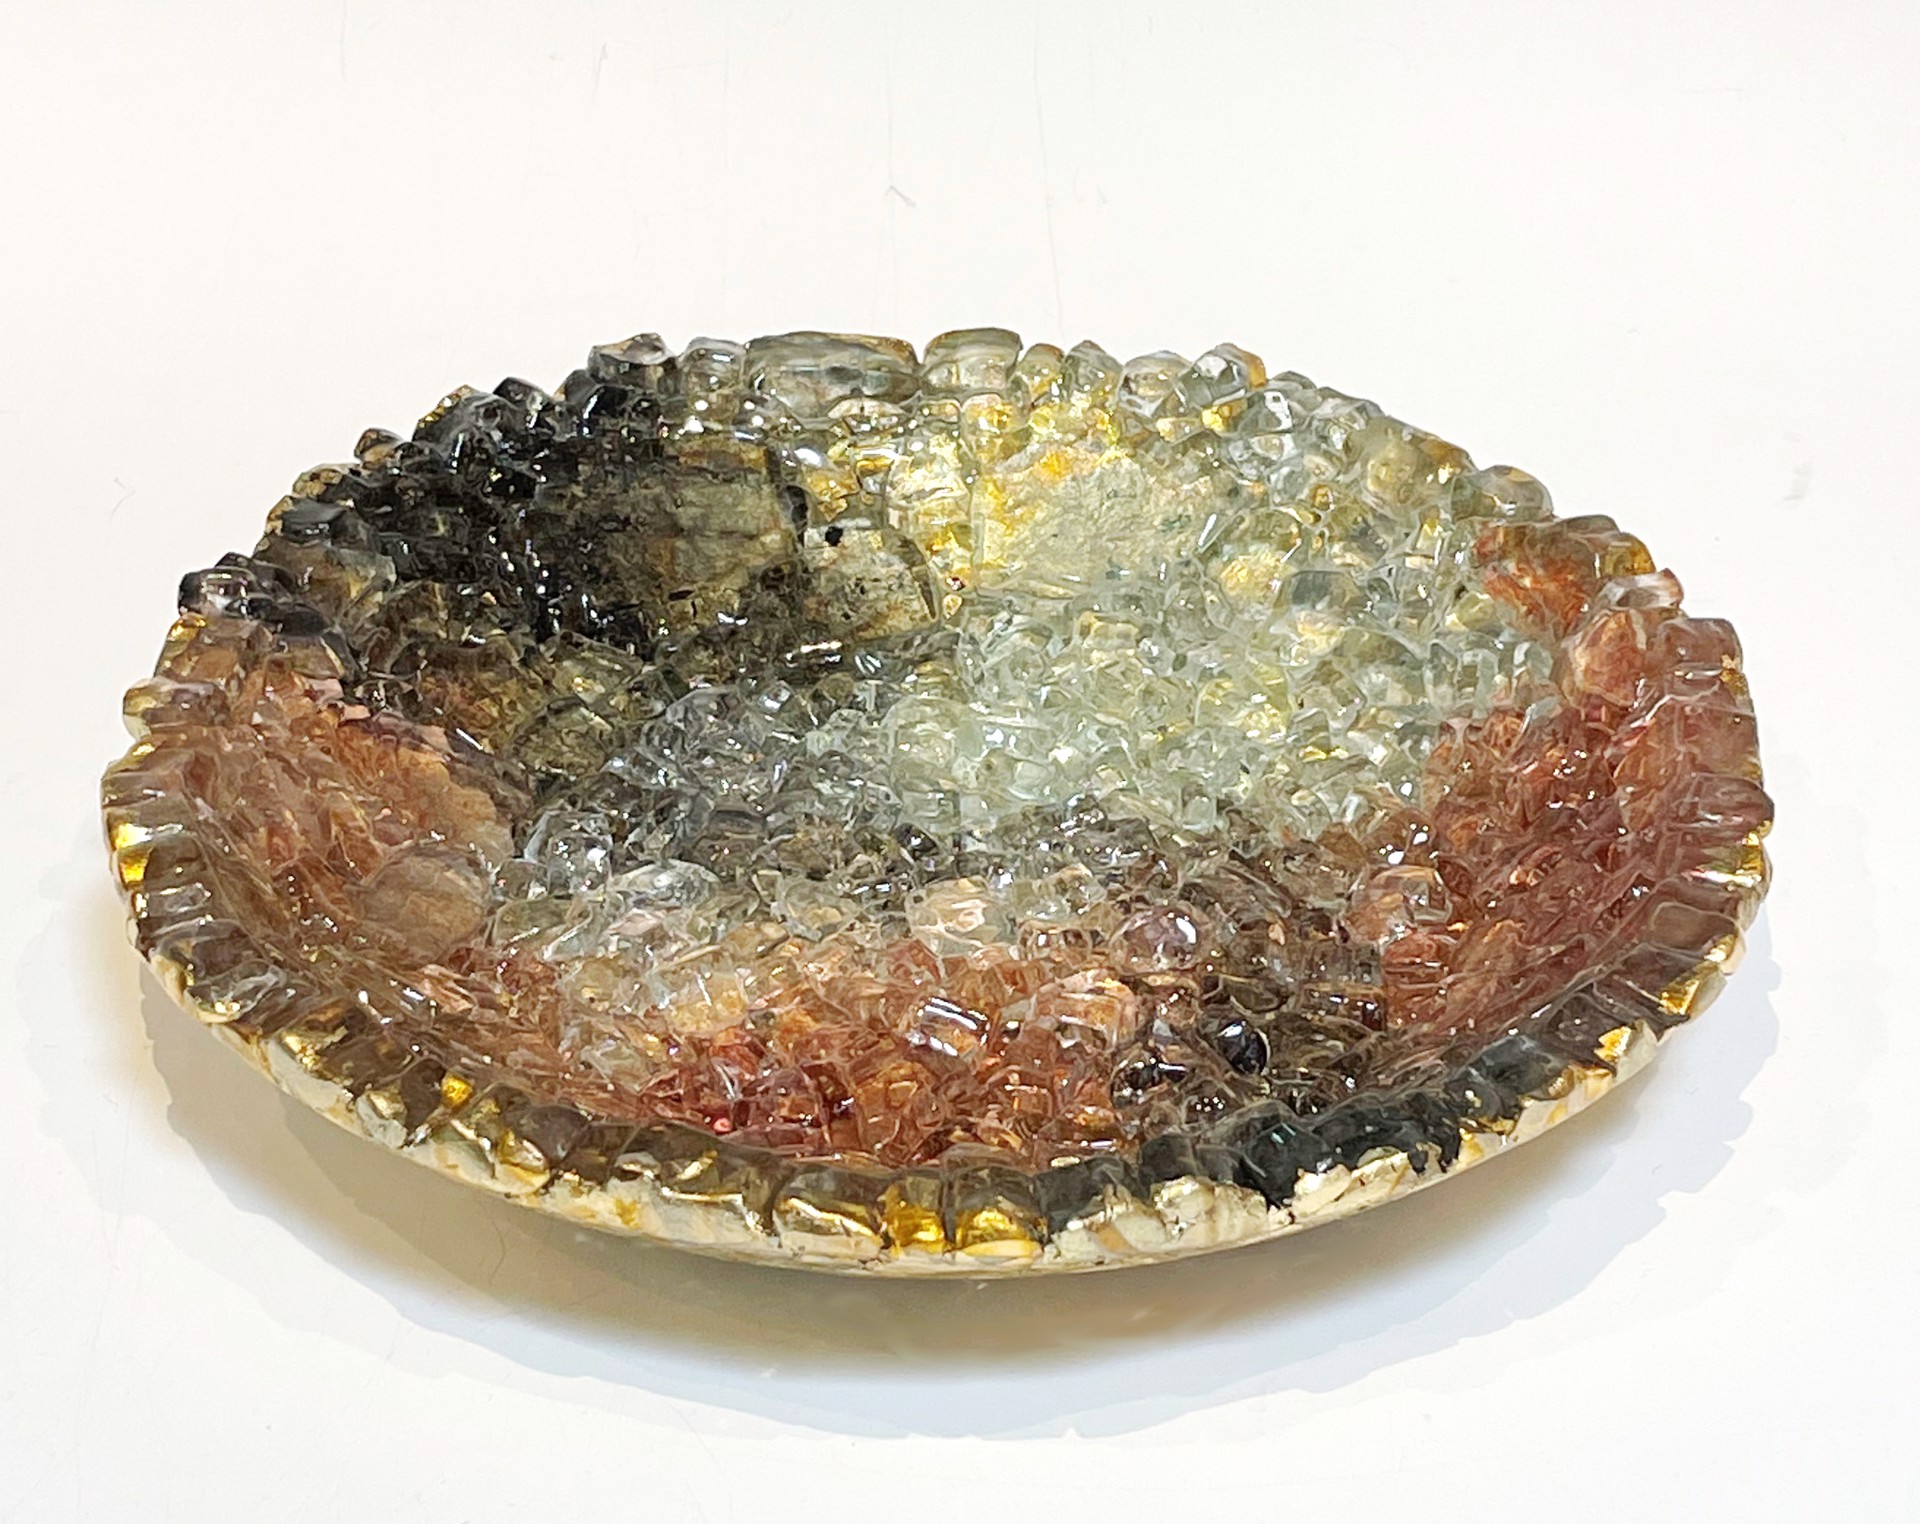 9.5" Glass Bowl - Coffee & Charcoal by Mira Woodworth